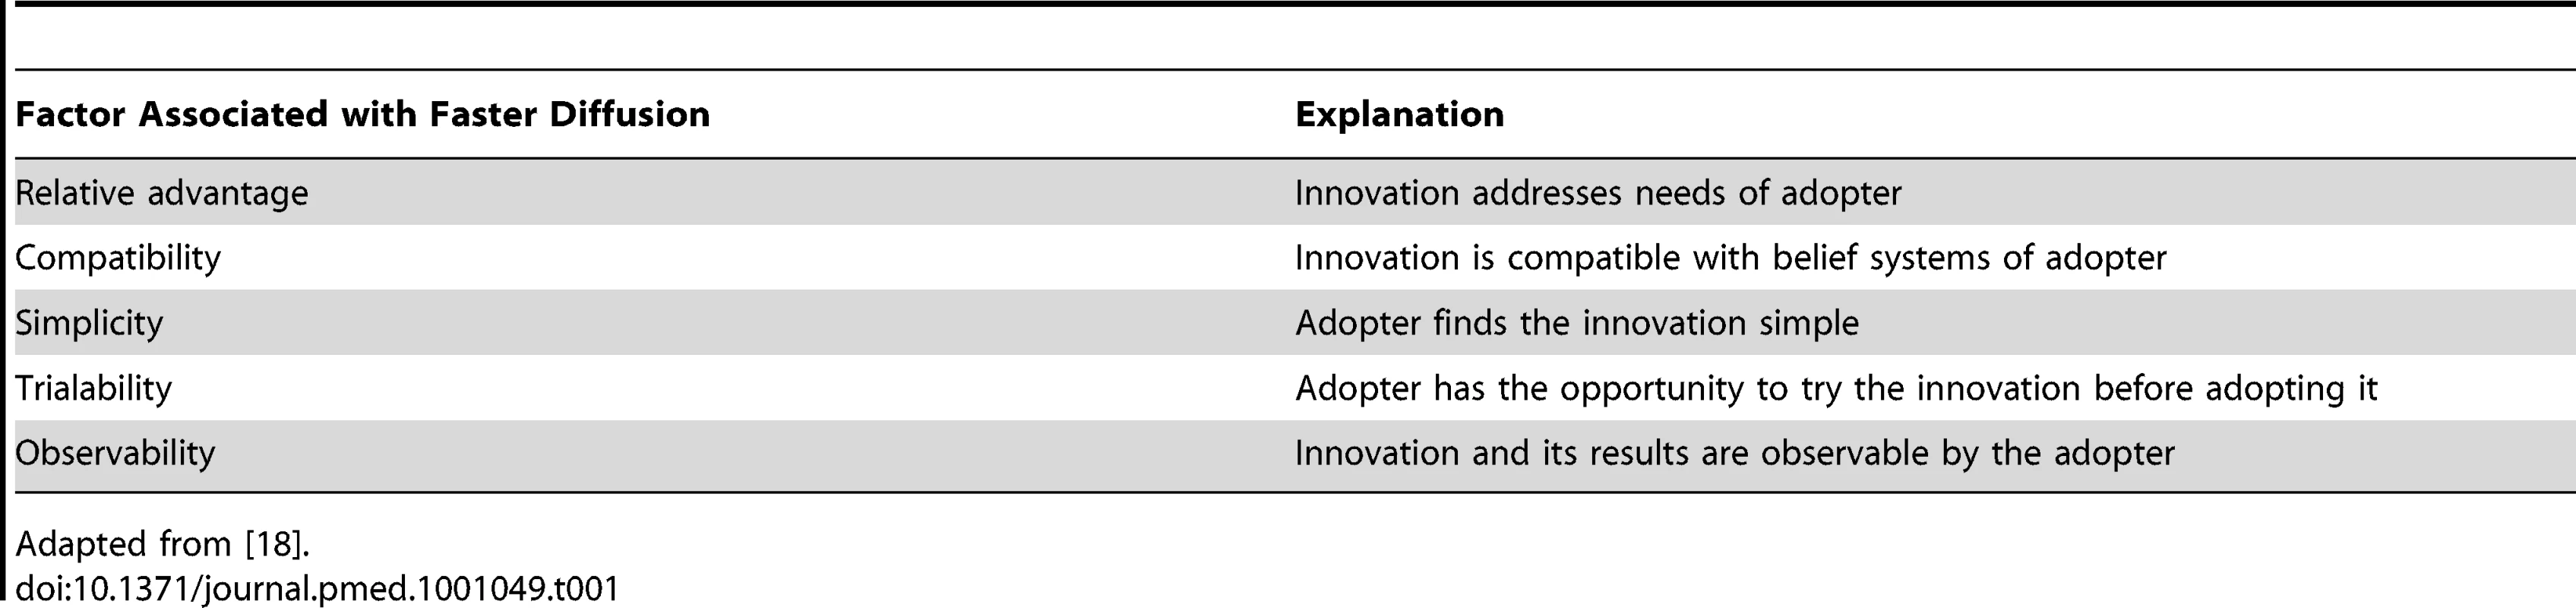 Factors associated with faster diffusion of an innovation.